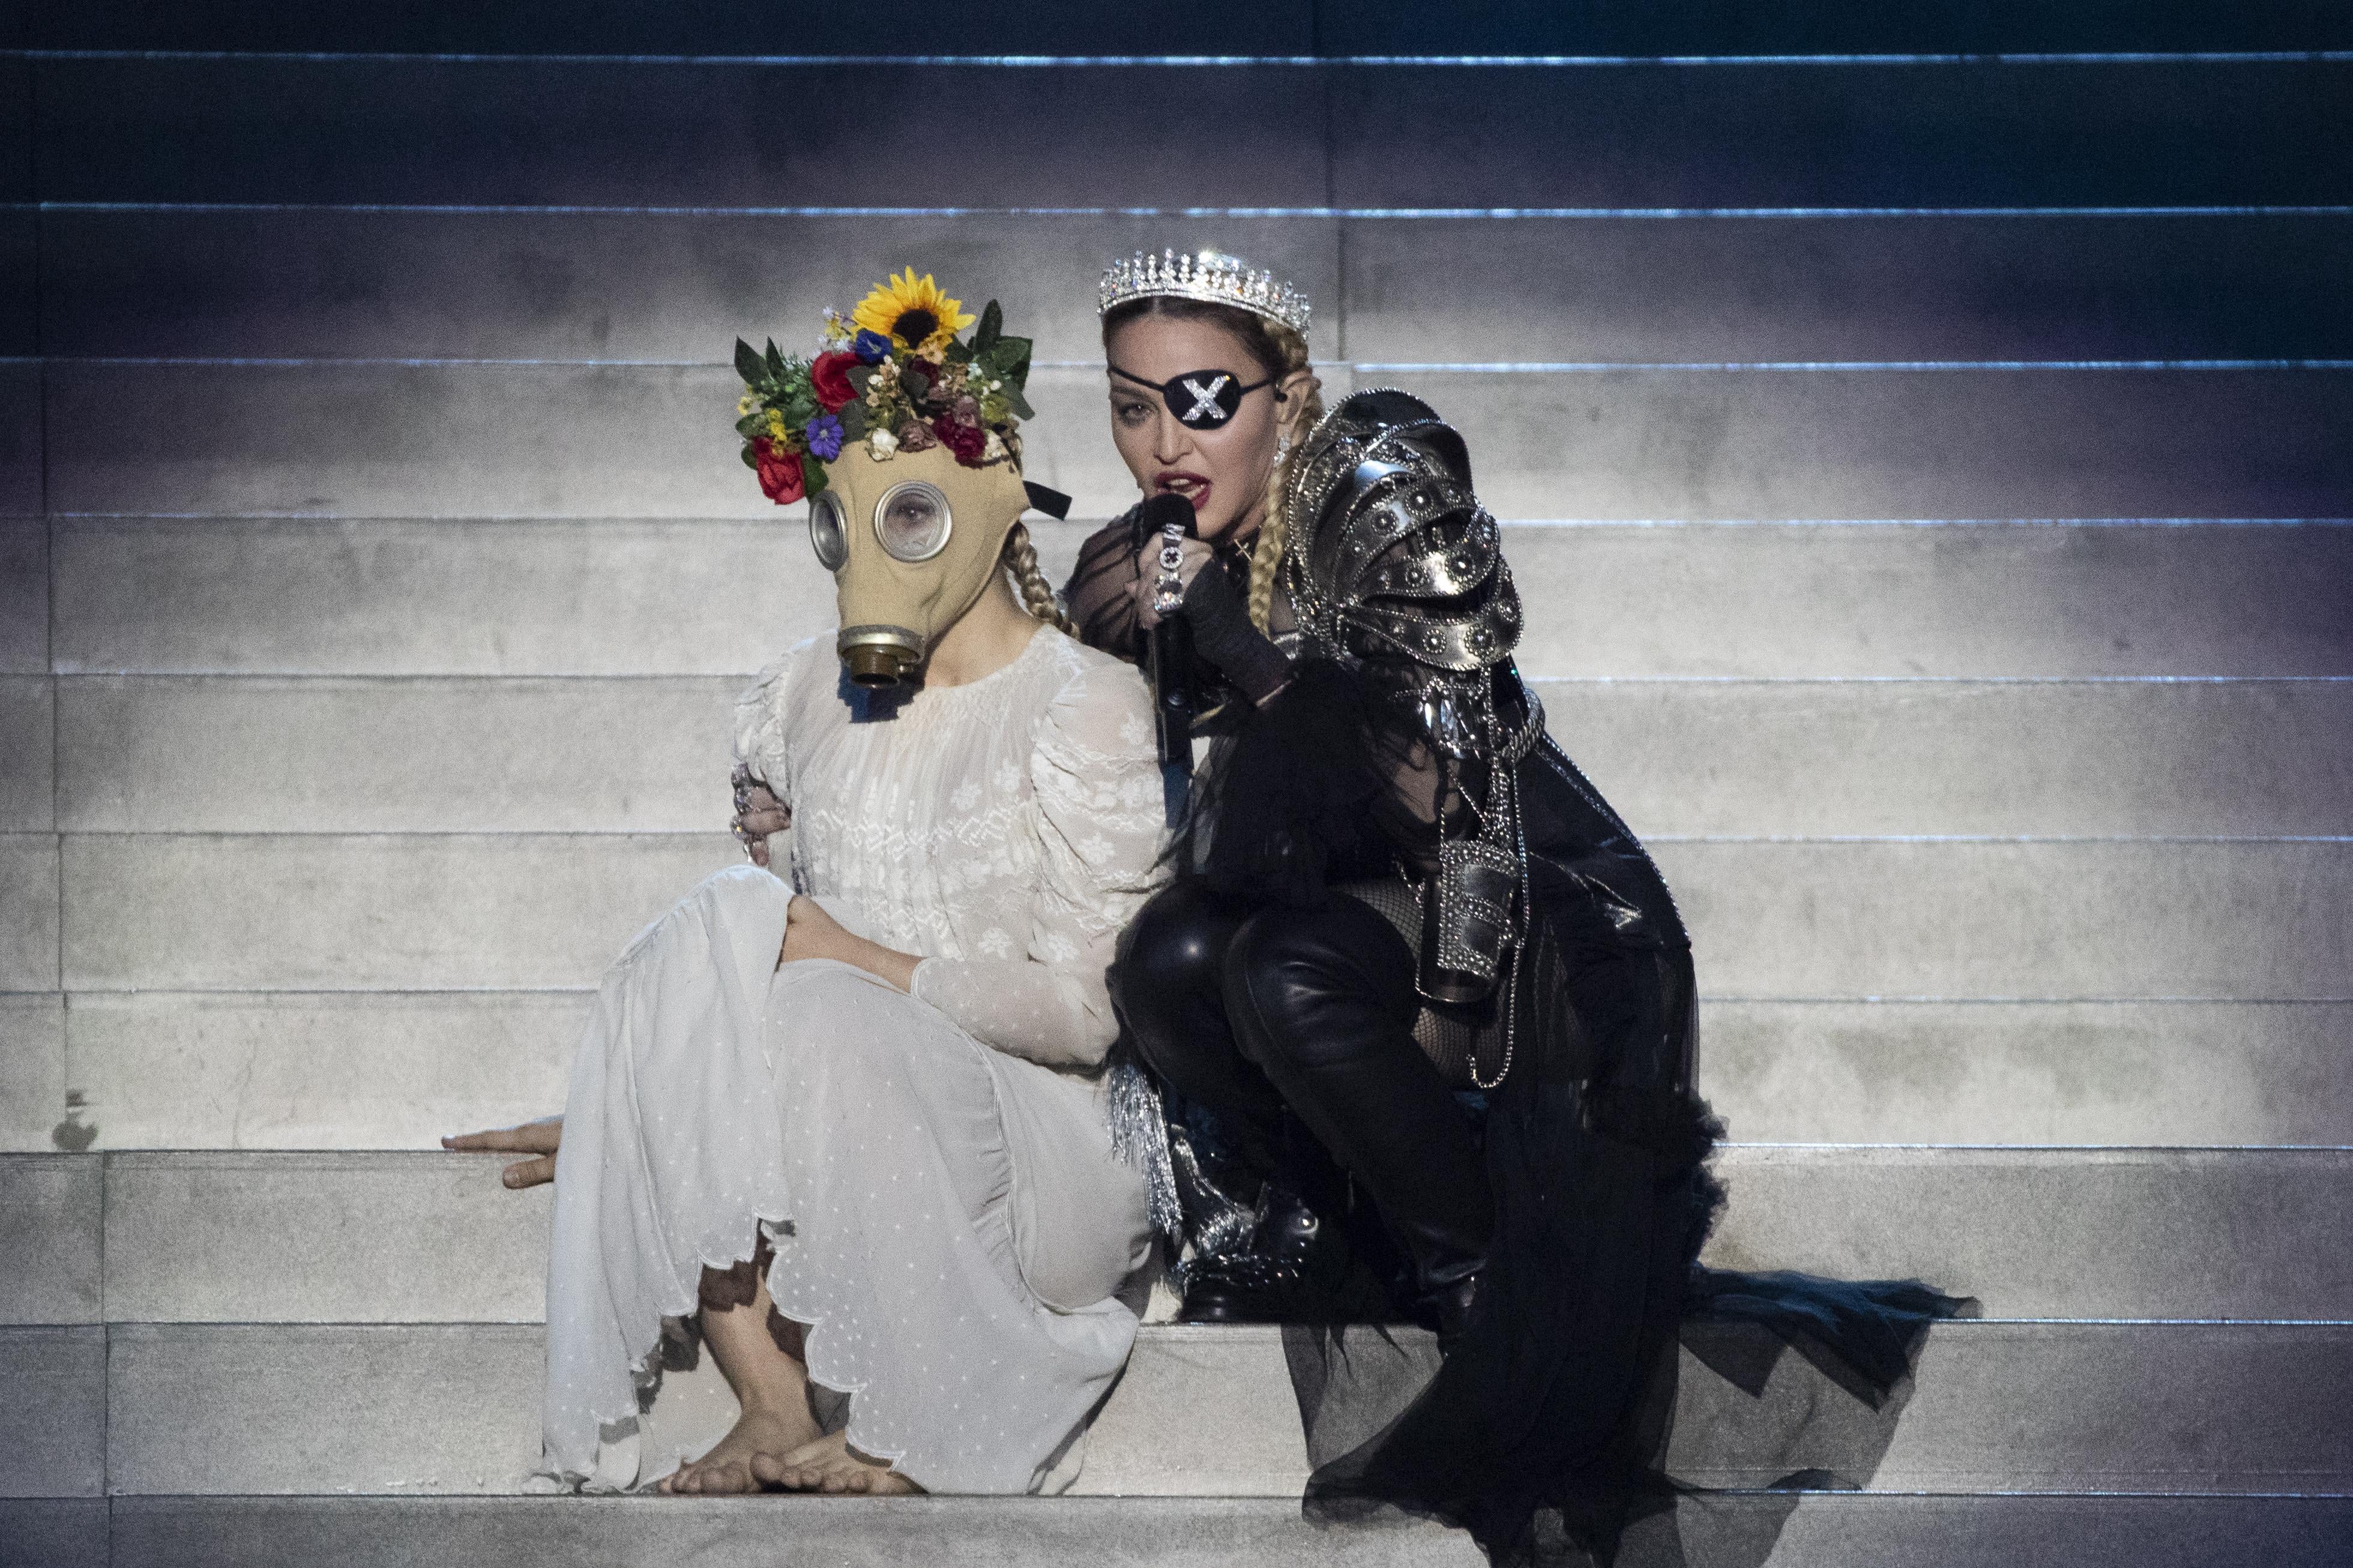 Madonna performs onstage with a dancer wearing a dress, flowers in her hair, and a vintage gas mask.